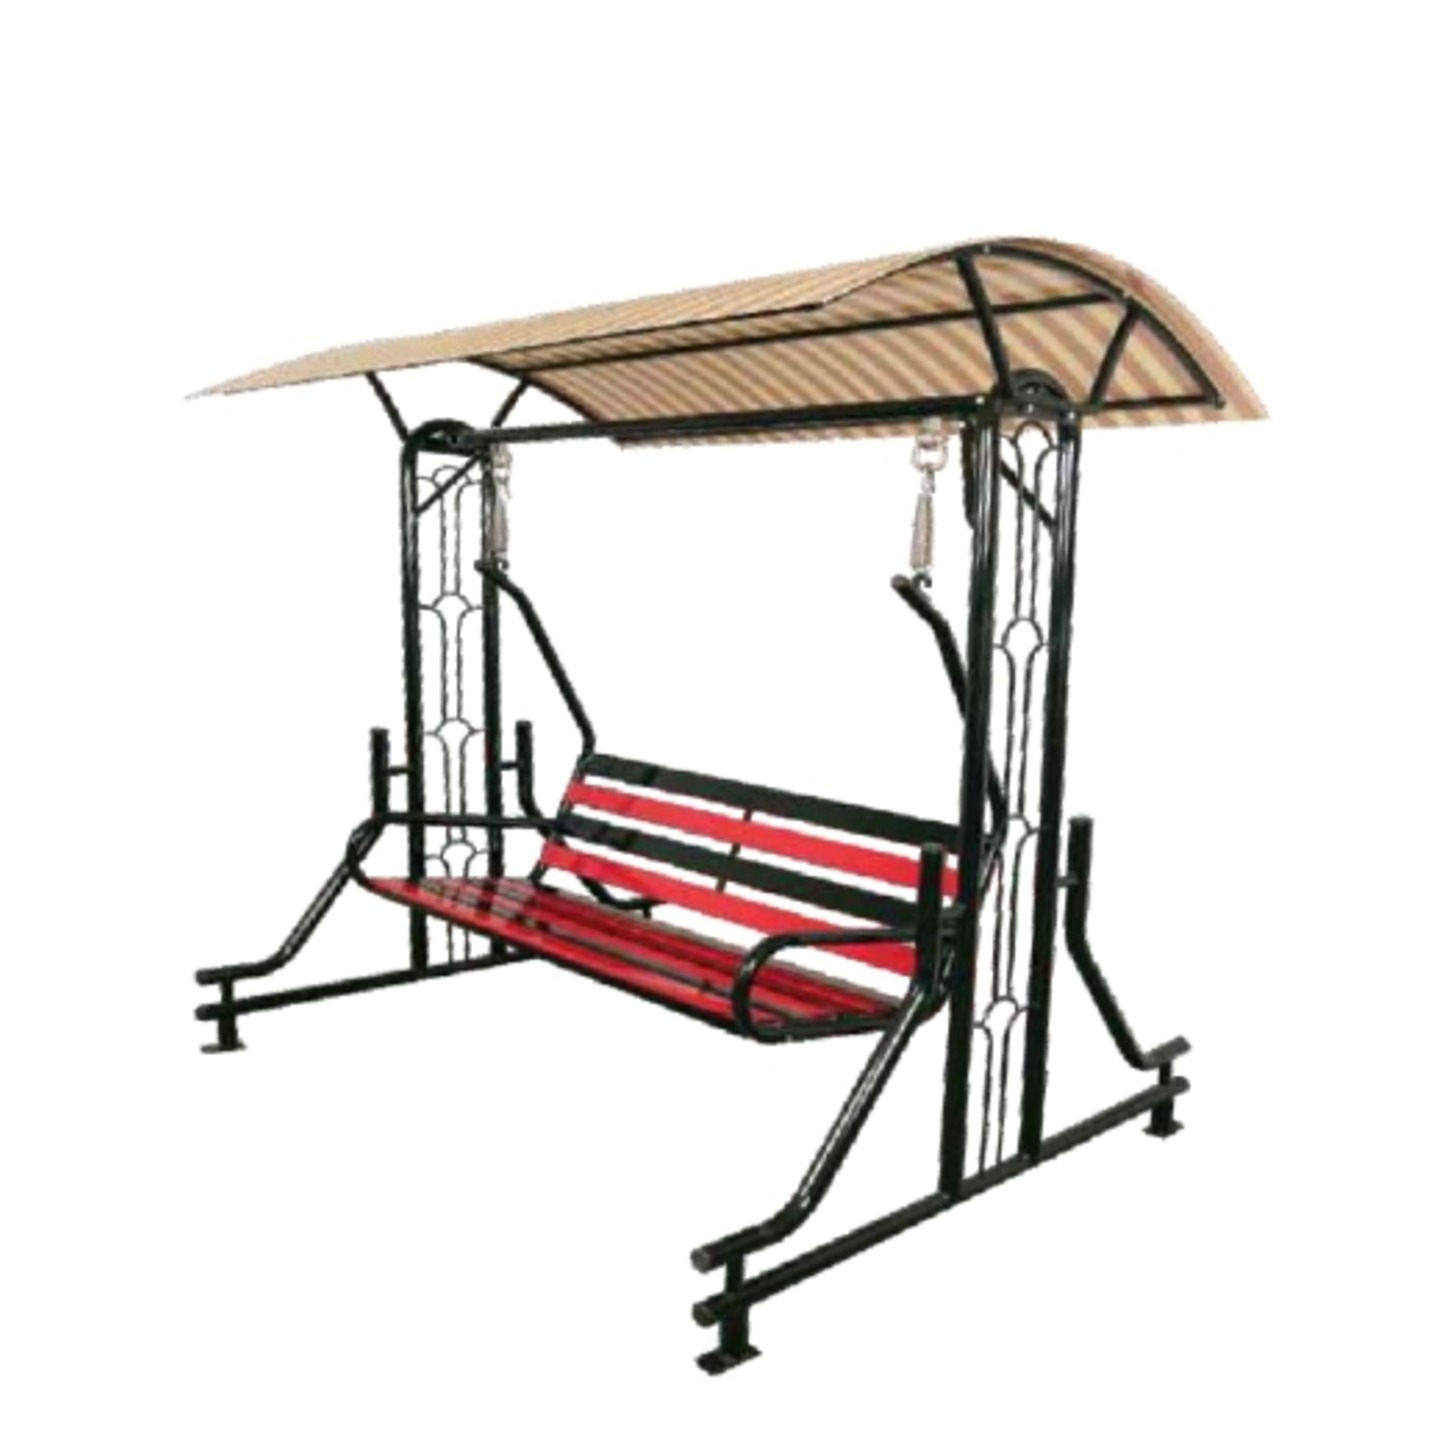 HJA Swing With StandCanopy Roof HOJ-001 In Red & Black Colour